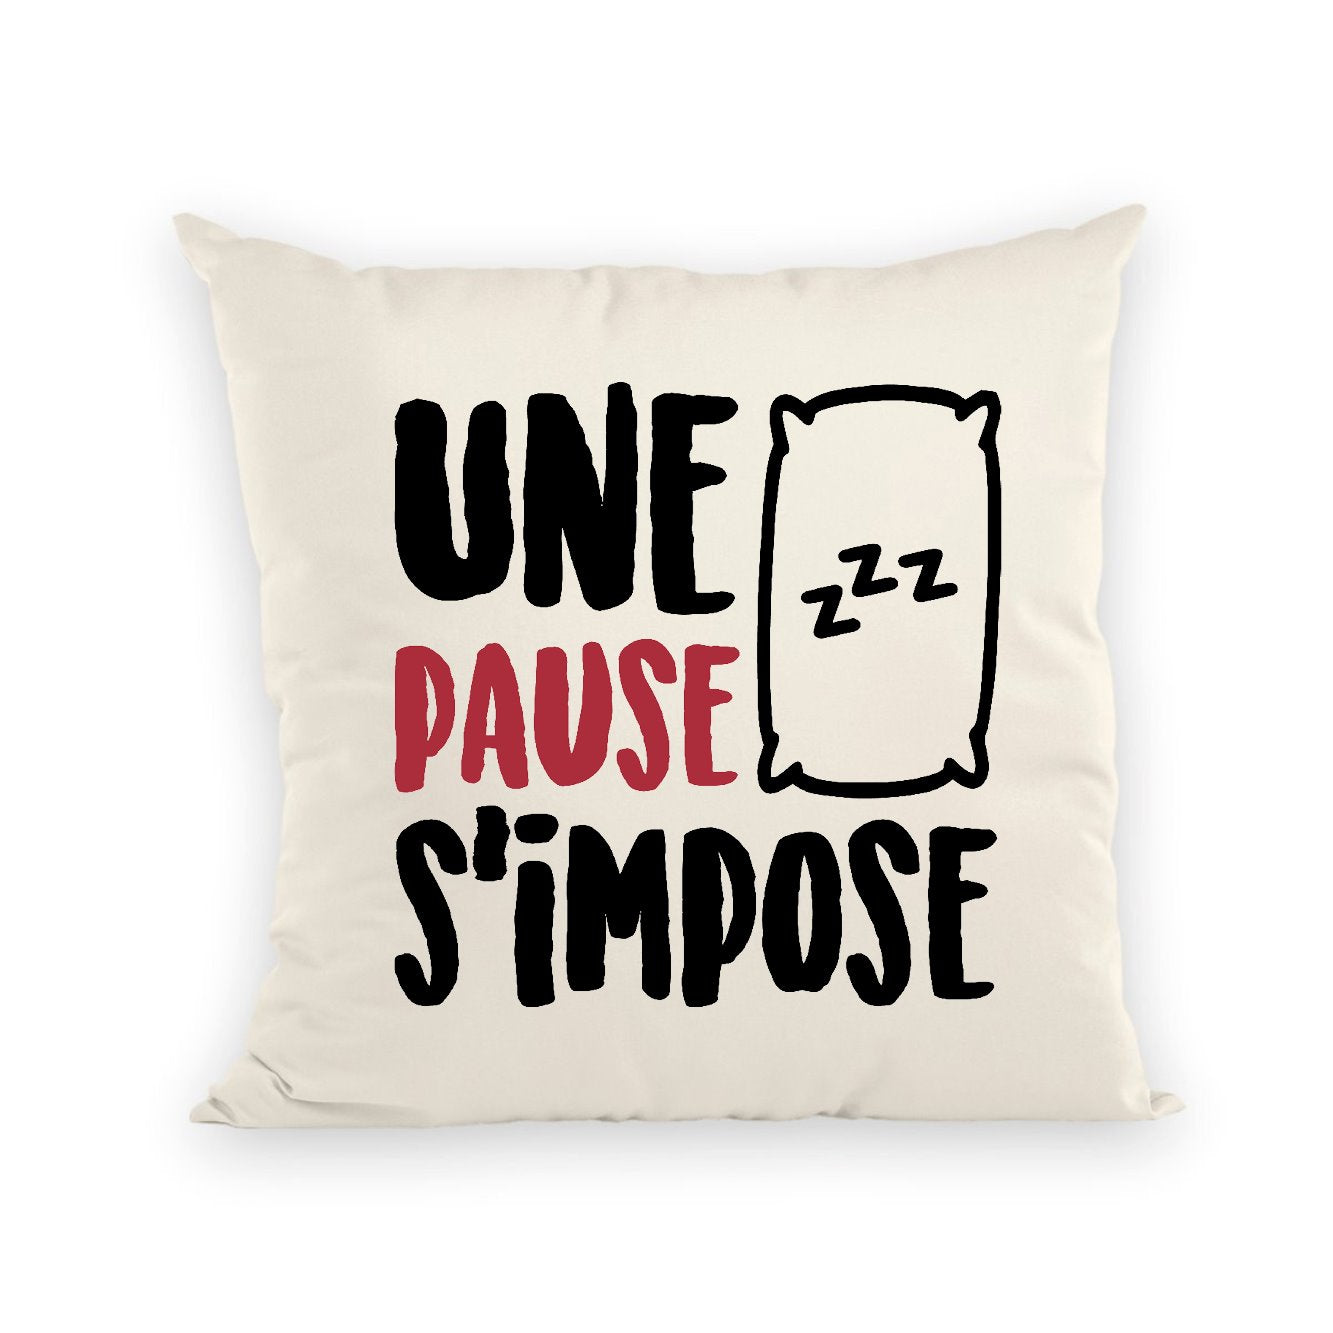 Coussin Une pause s'impose 